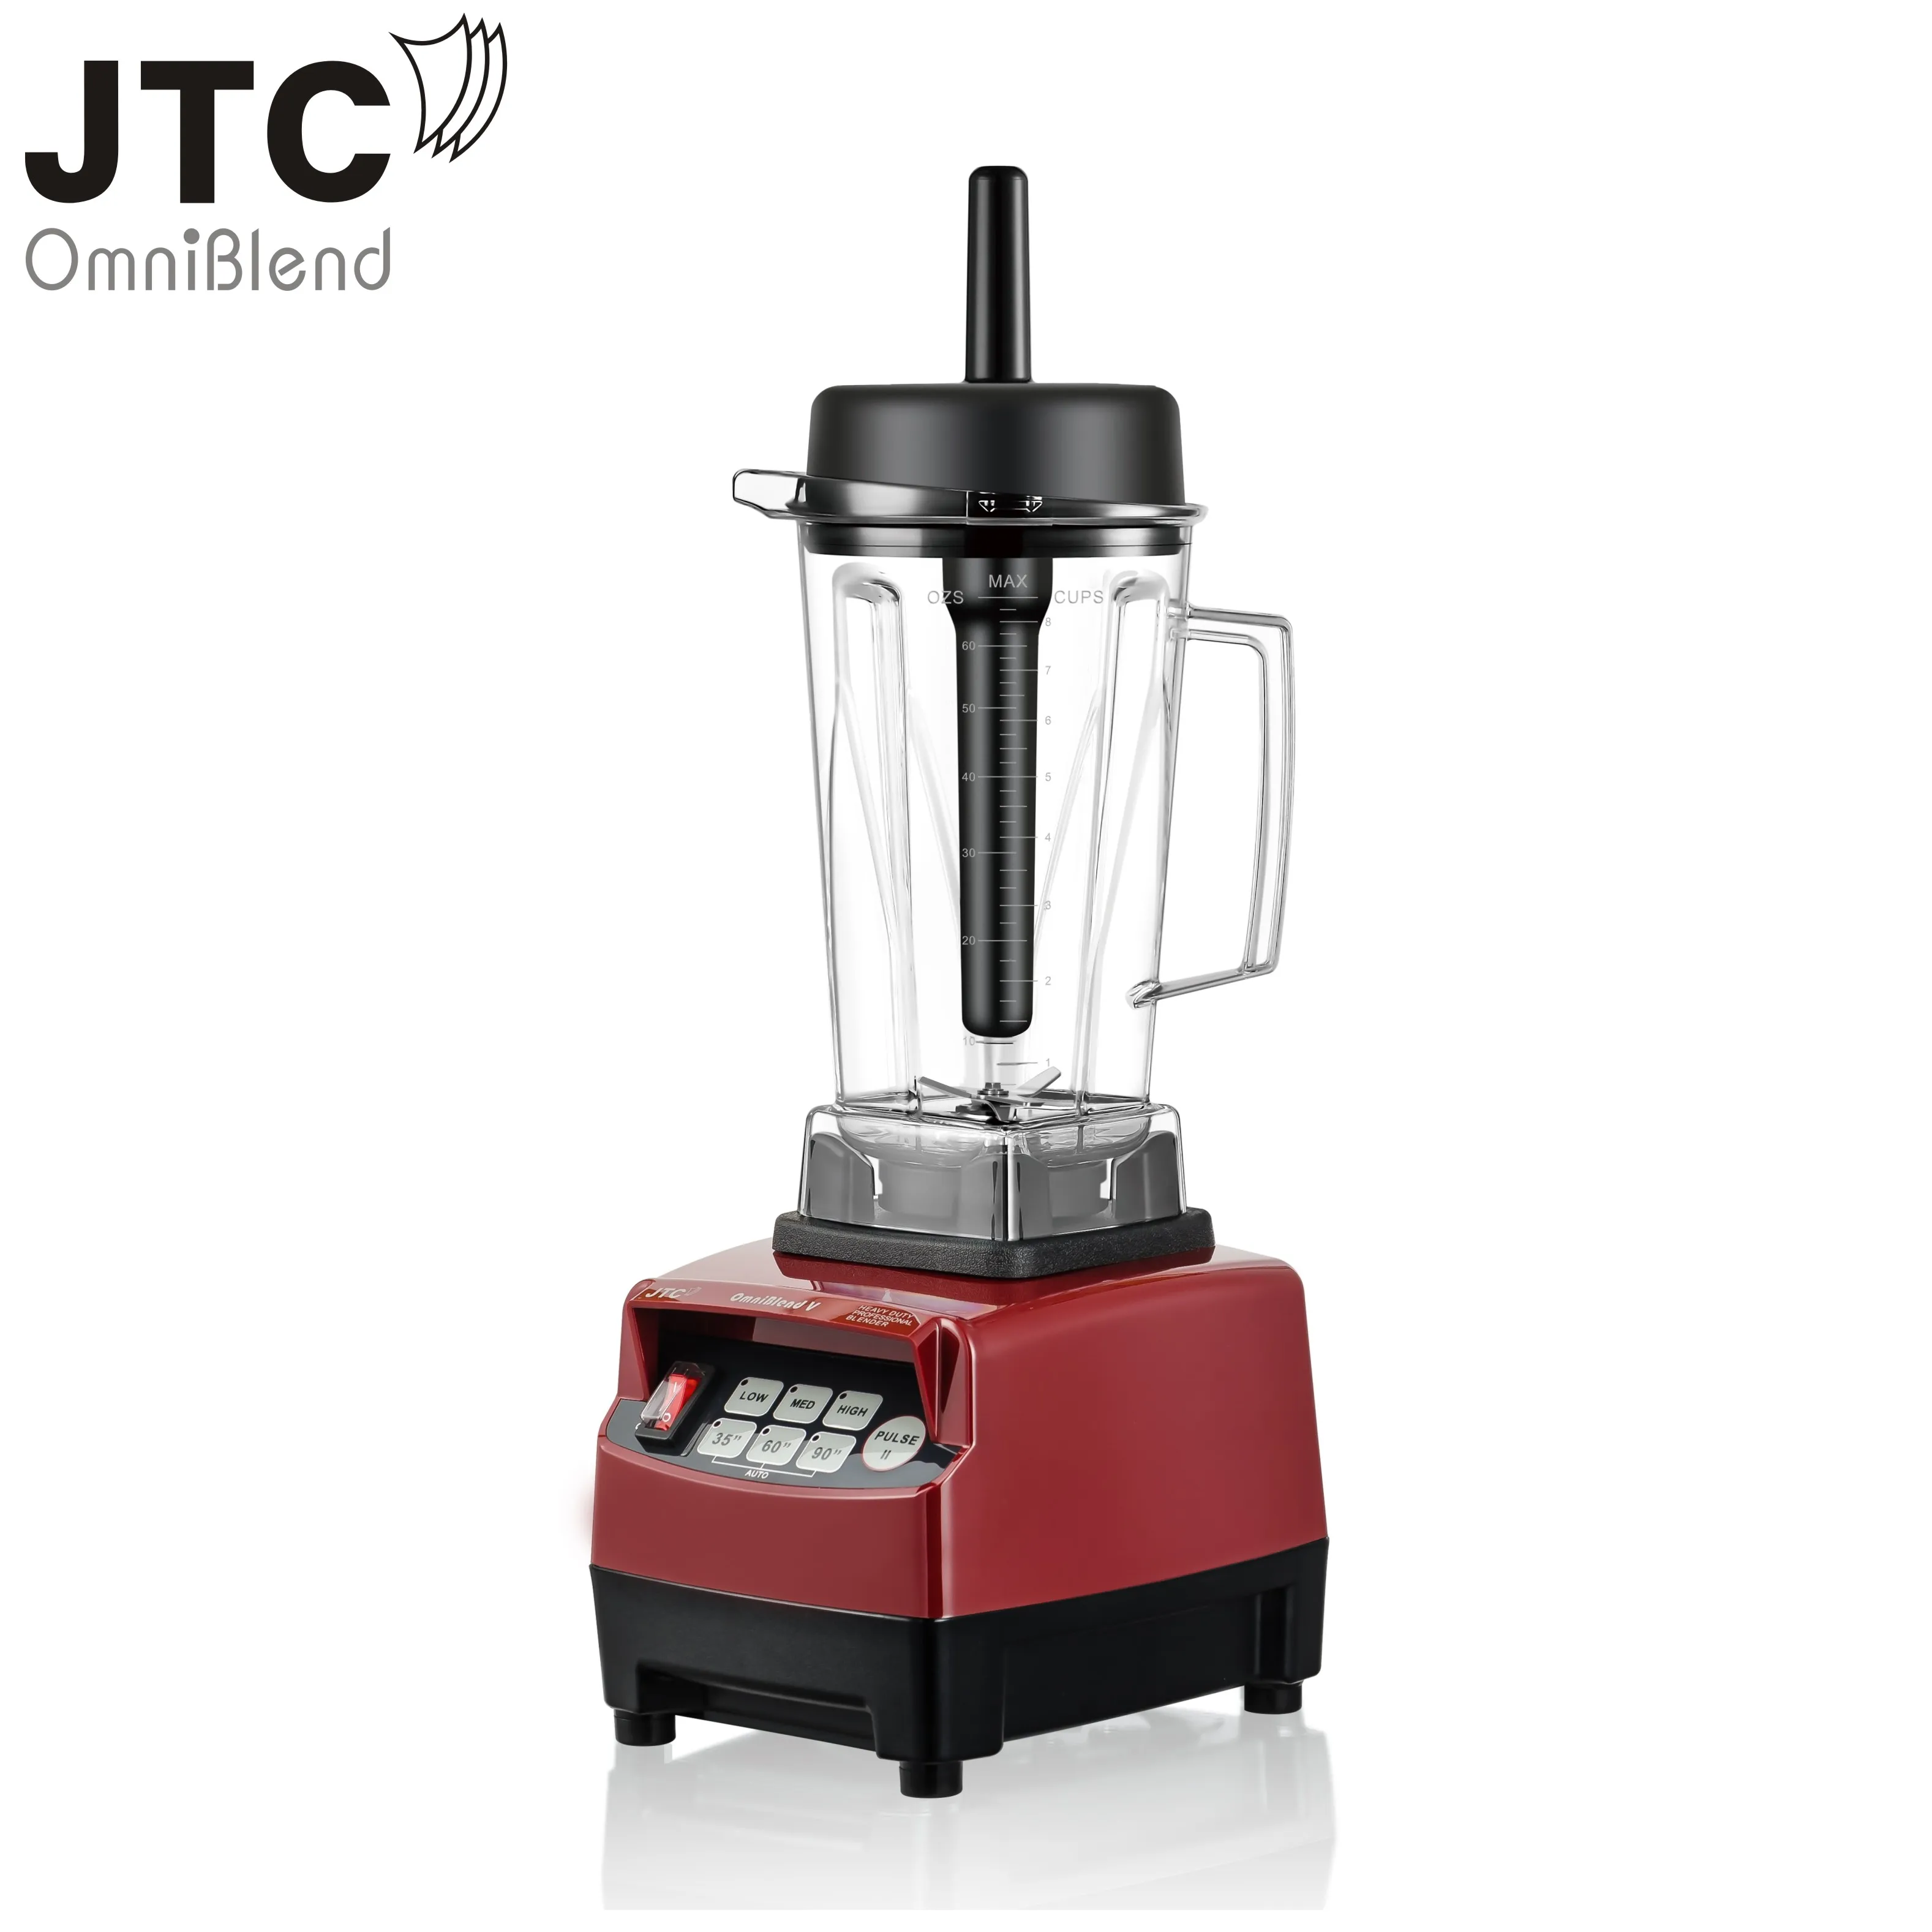 

BPA FREE 3HP JTC OmniBlend commercial blender food mixer juice FREE SHIPPING 100% GUARANTEE NO. 1 QUALITY IN THE WORLD